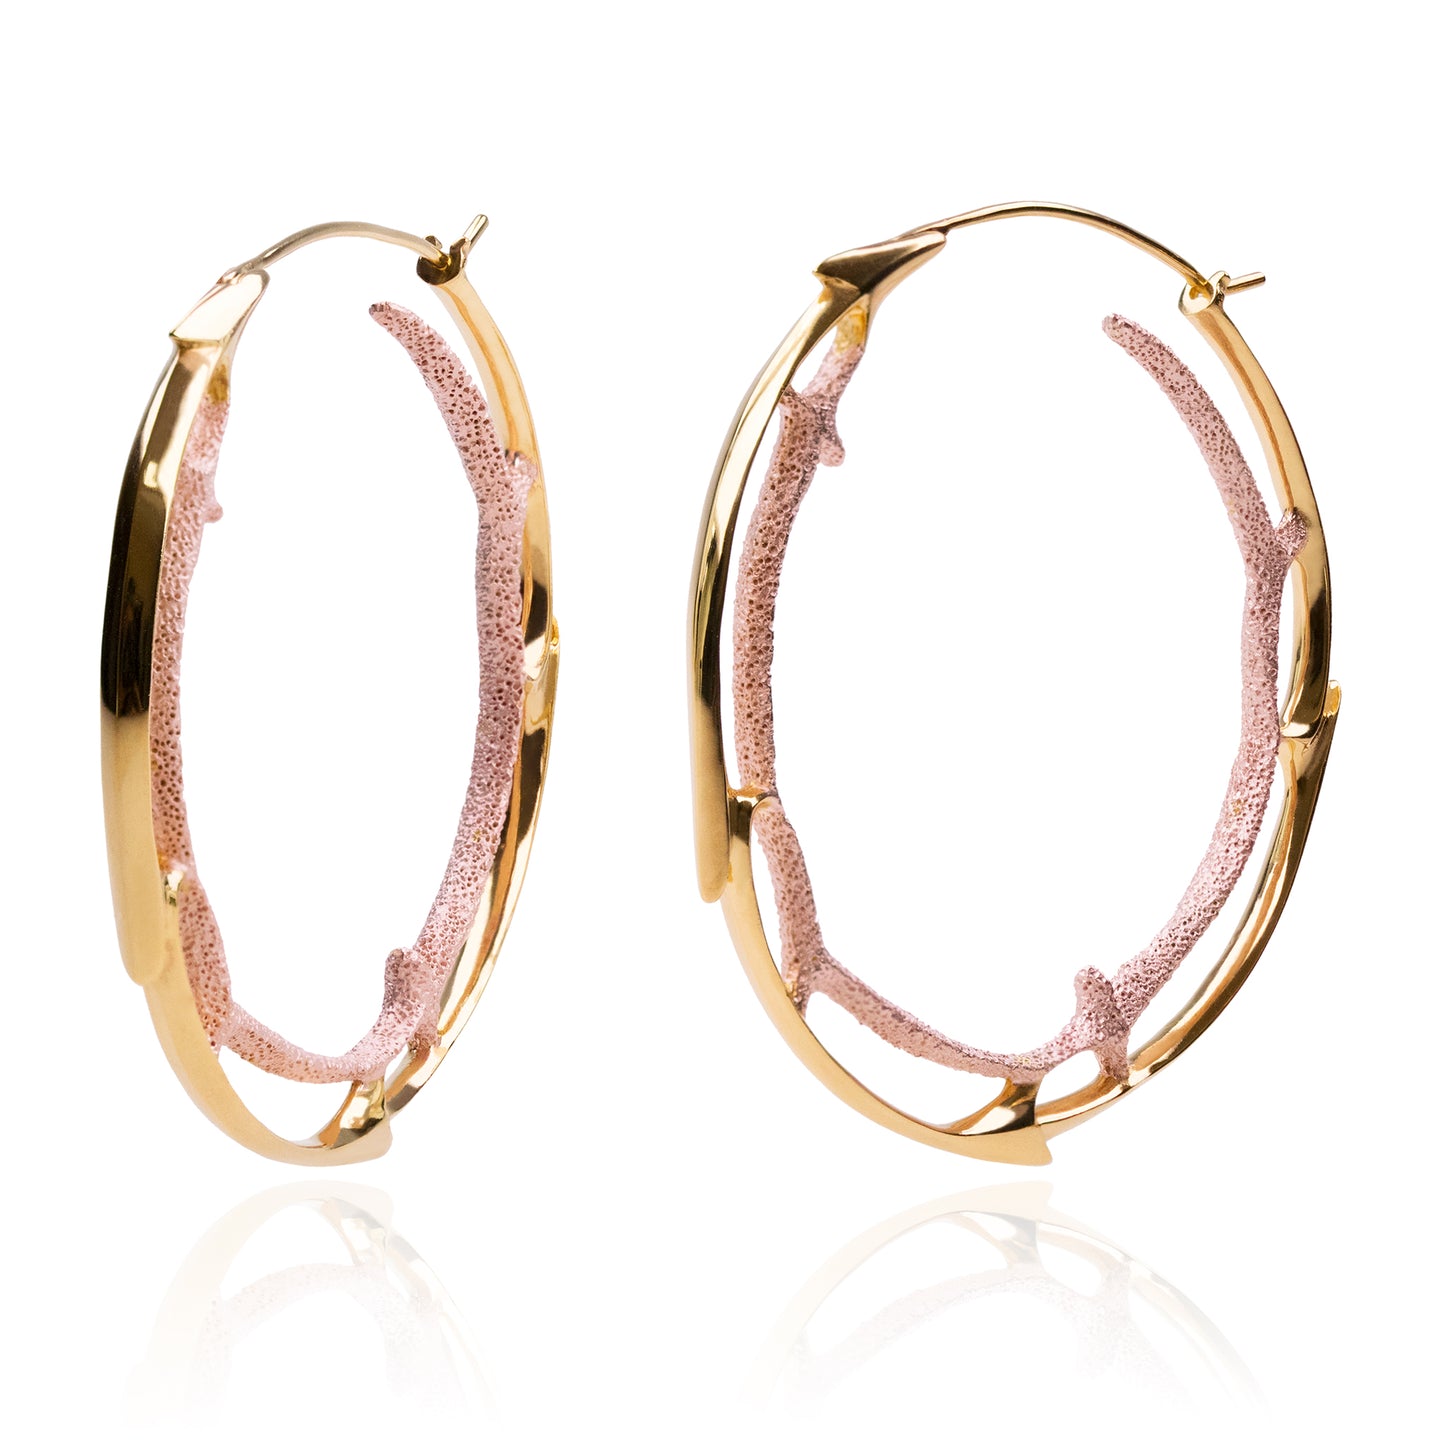 Orme-Brown Contemporary Fine Jewellery The Way Ethical Sunset Large Statement Hoop Earrings in Sustainable recycled silver with yellow gold plating